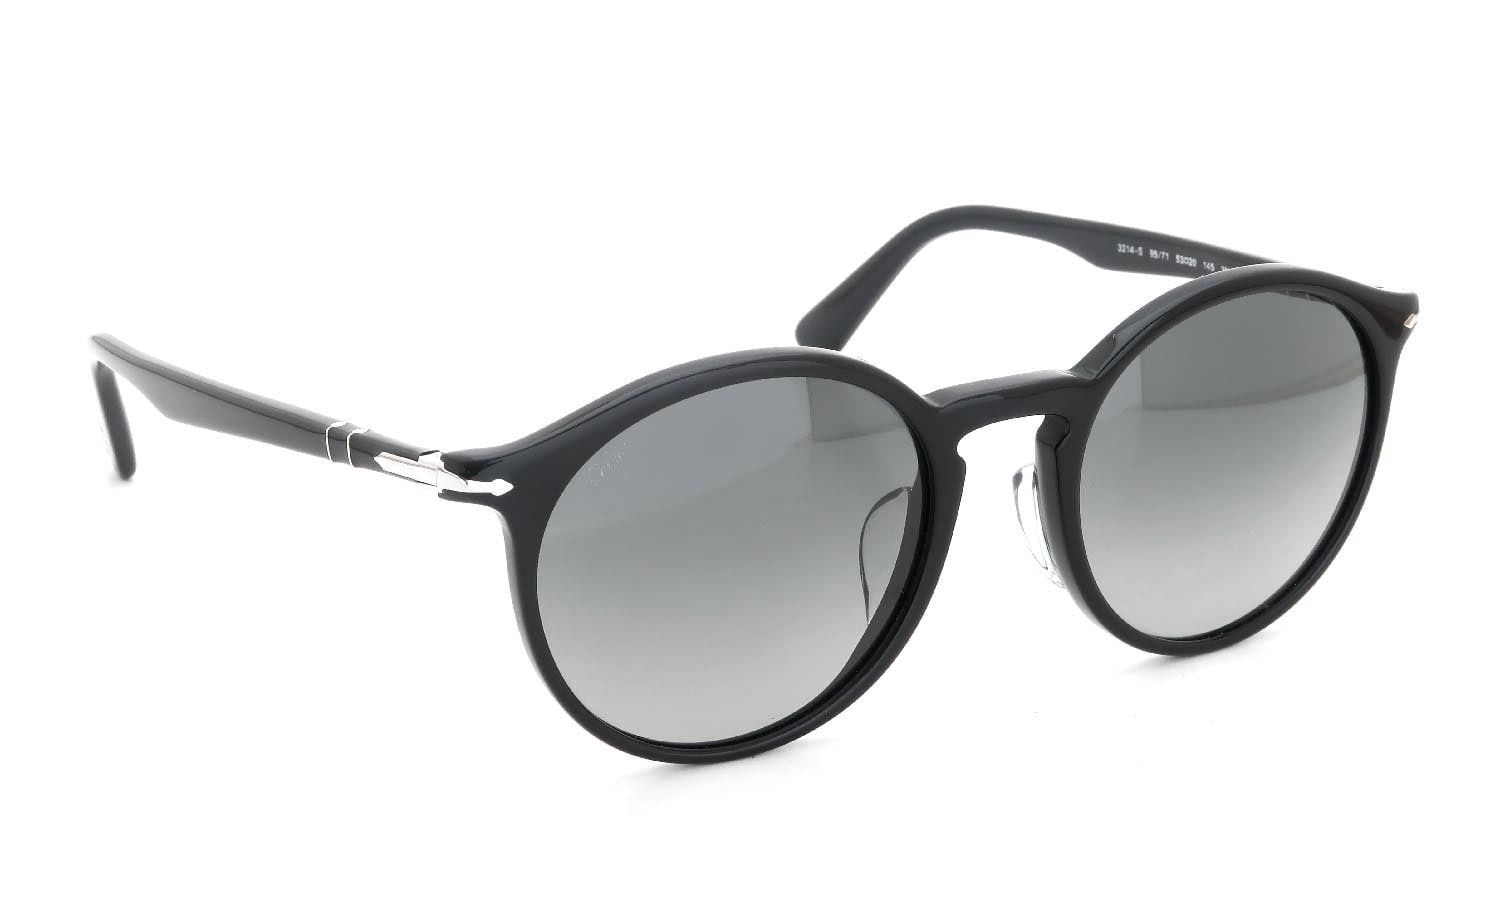 Persol 3314-S 95/71 53size